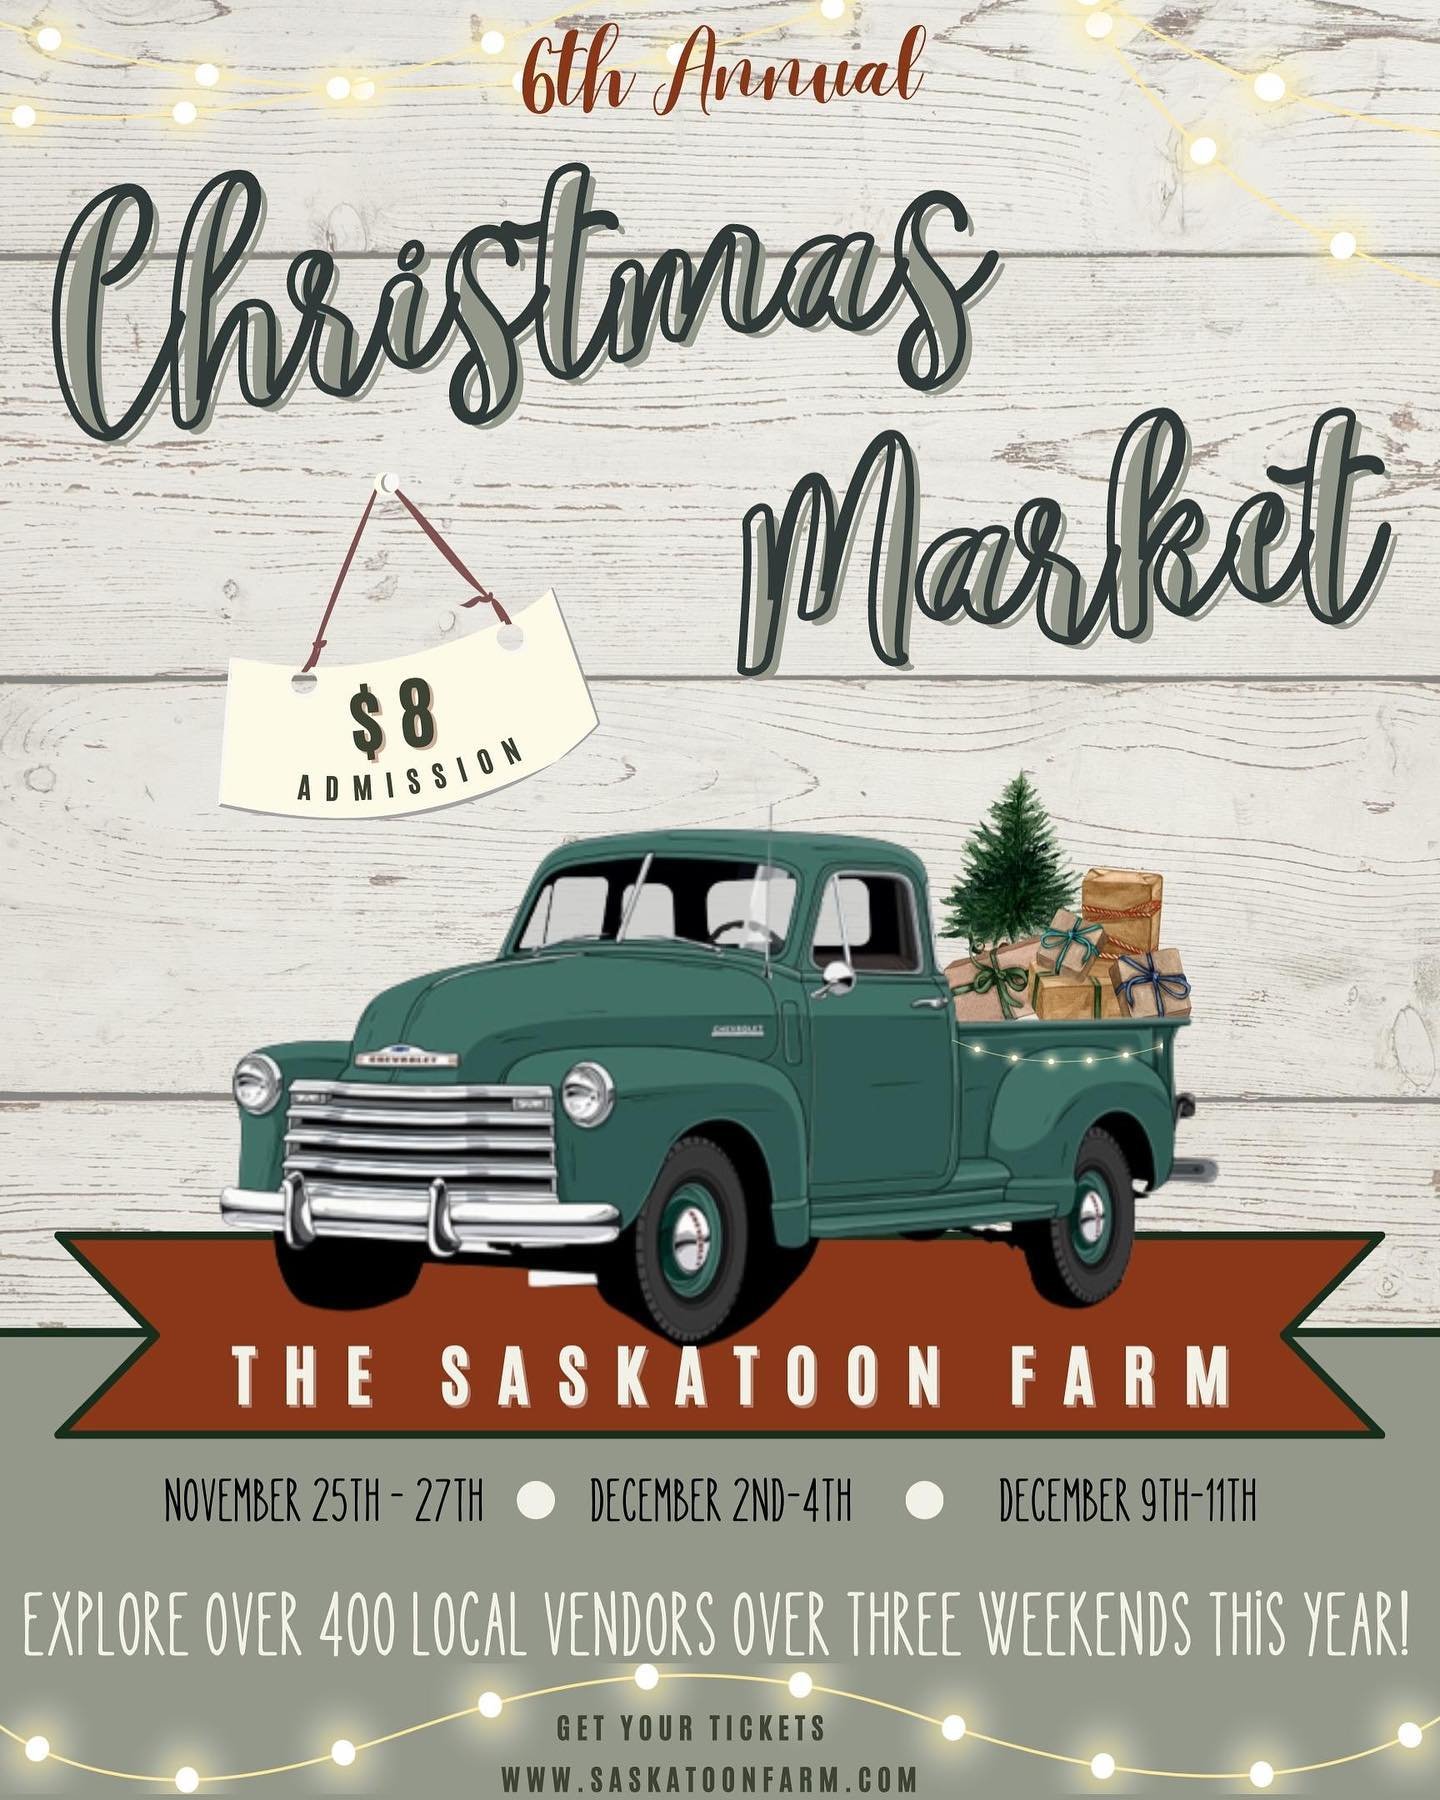 Your Favourite Holiday Tradition is Back! 

Celebrate this holiday season with us at The Saskatoon Farm! This year marks our 6th annual Christmas Market, and we can't wait to celebrate yet another incredible year with you. 

We are welcoming over 400